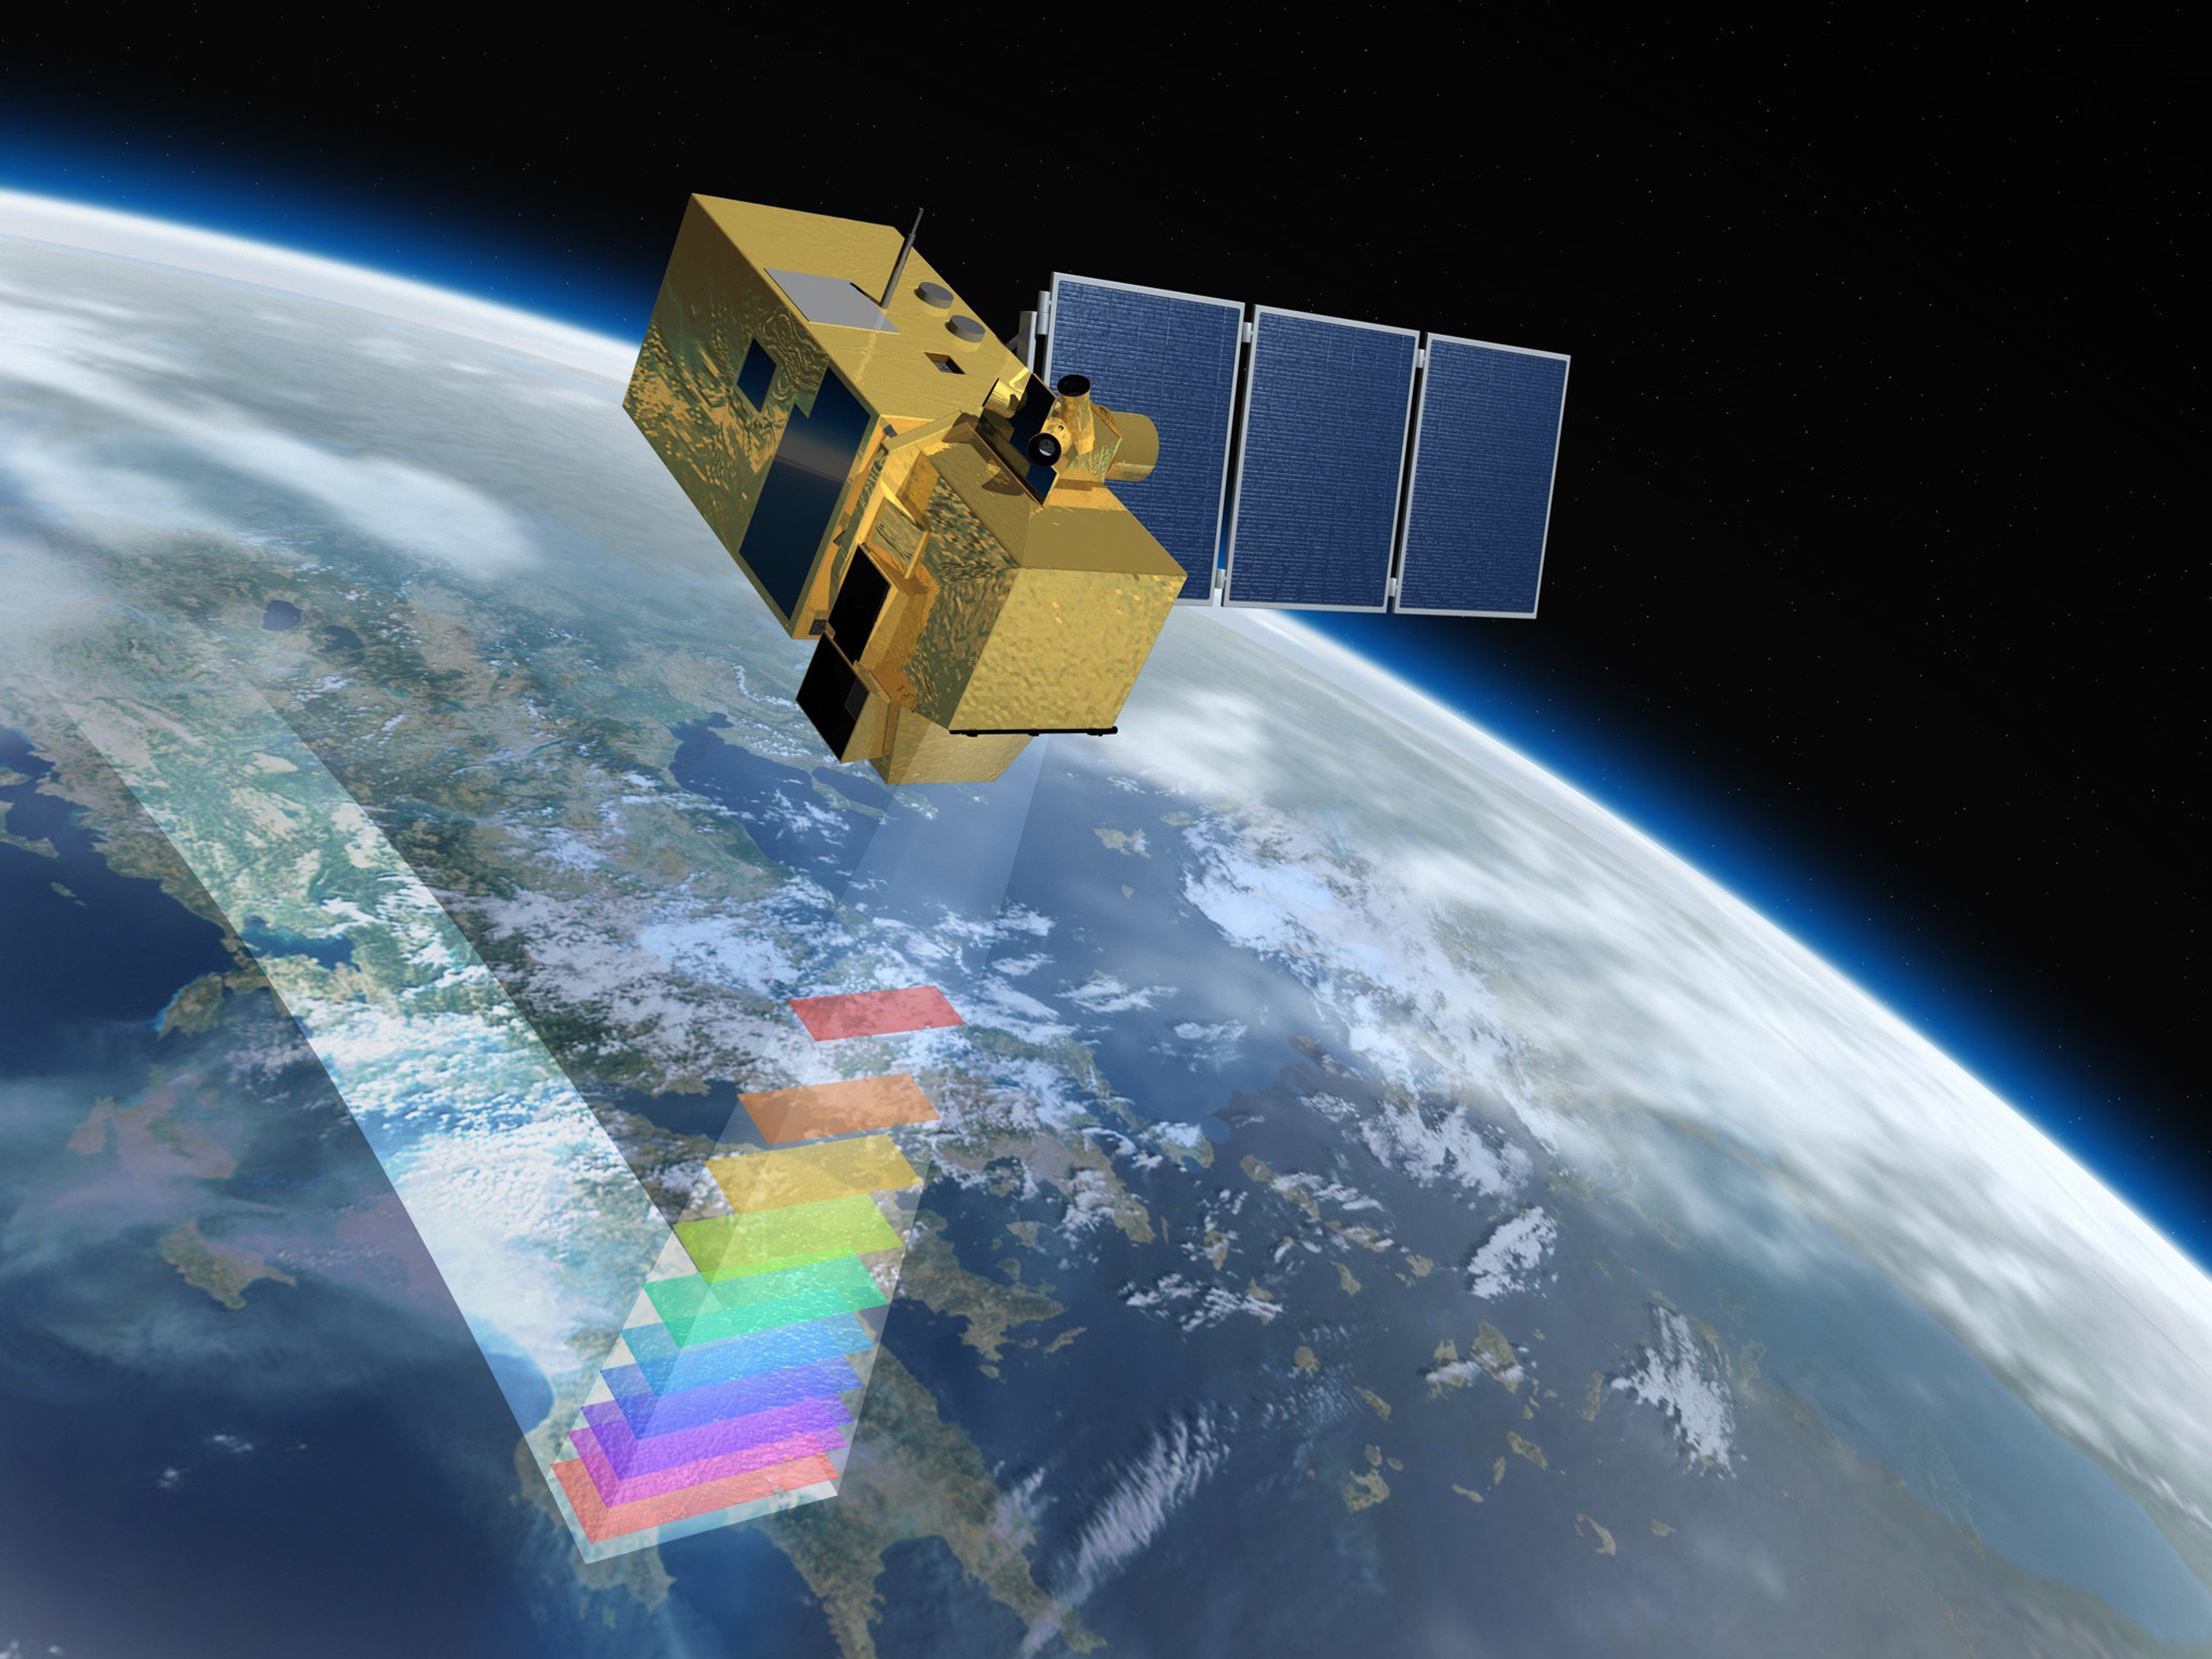 esa-s-sentinel-2a-readies-for-launch-earth-imaging-journal-remote